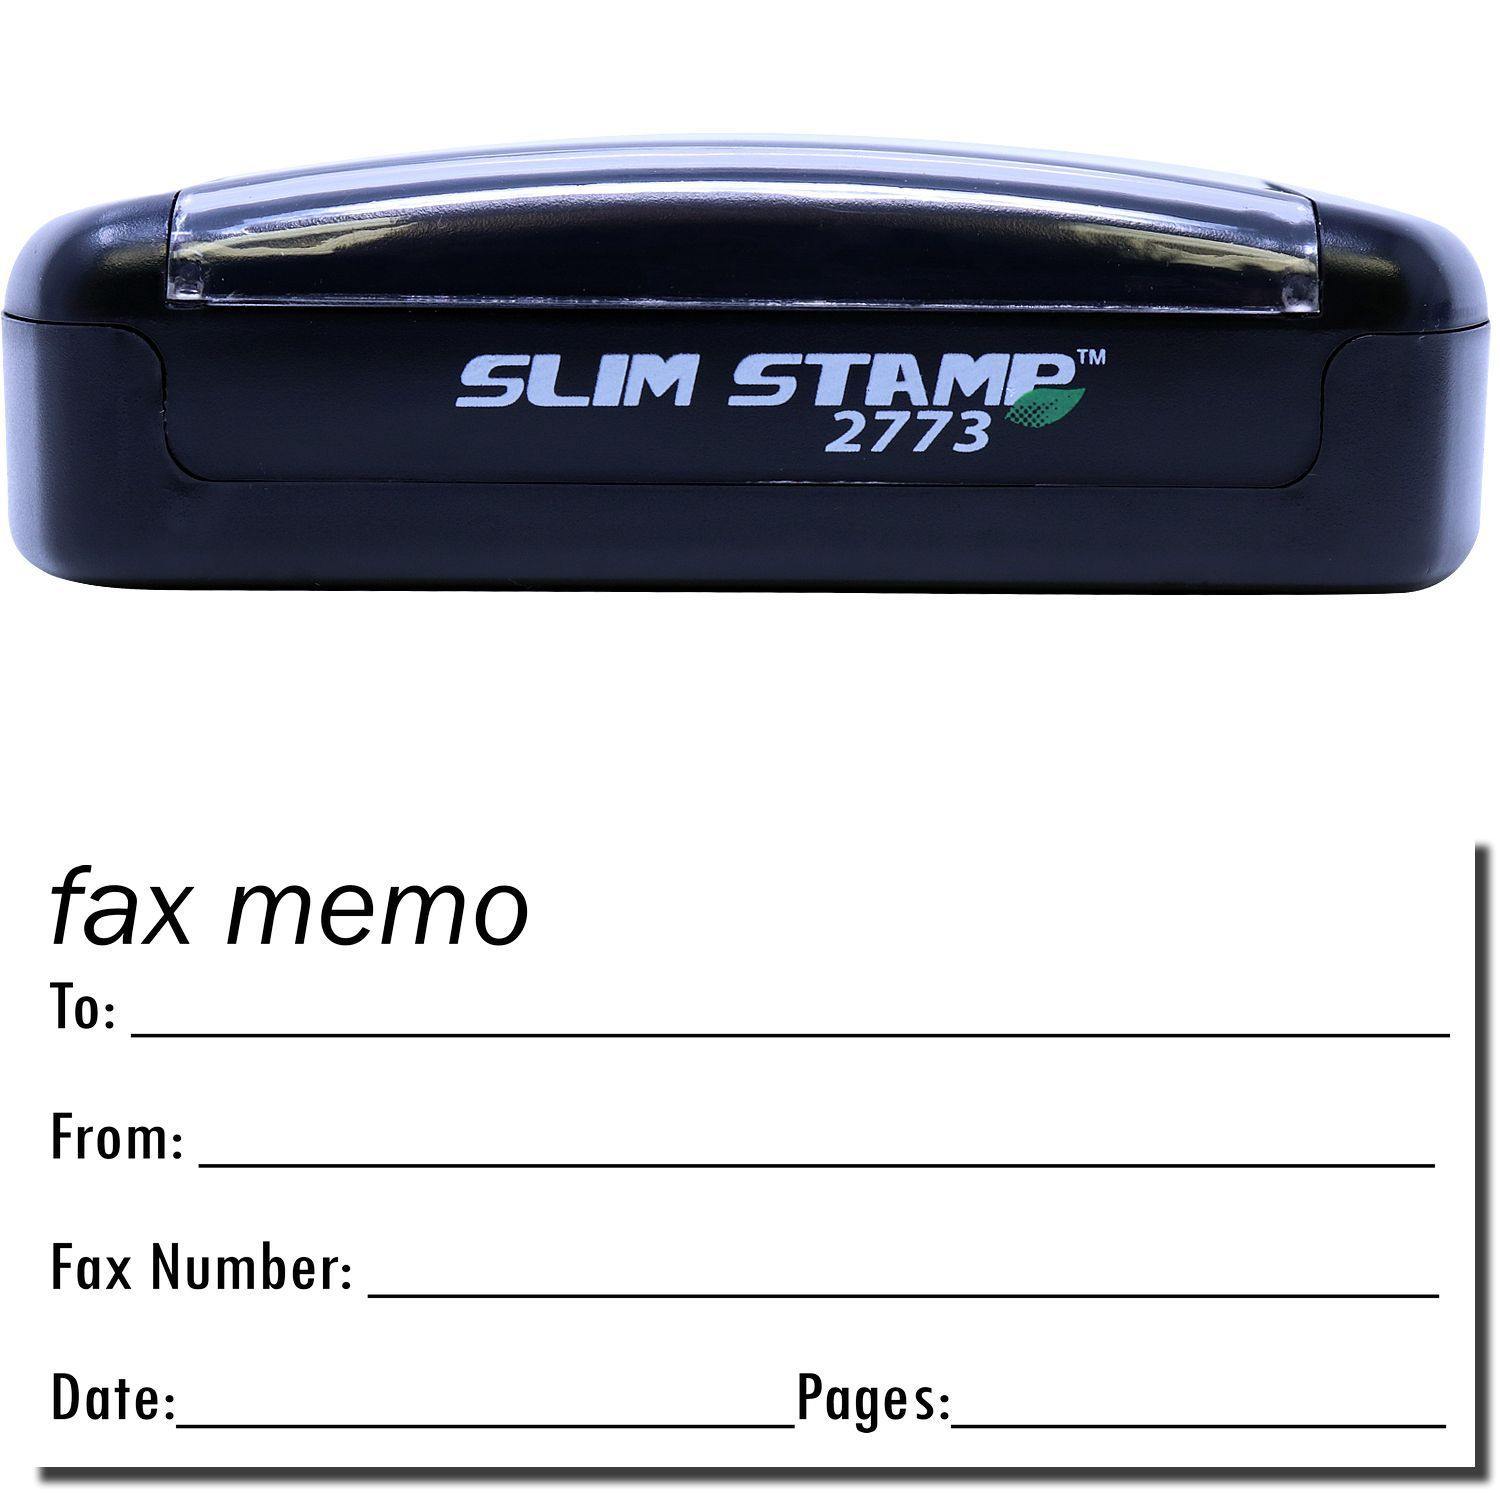 A stock office pre-inked stamp with a stamped image showing how the text "fax memo" is displayed horizontally with a form underneath for filling in details of the fax like whom the fax is being sent to, who is sending the fax, fax number, date, and number of pages is shown after stamping from it.